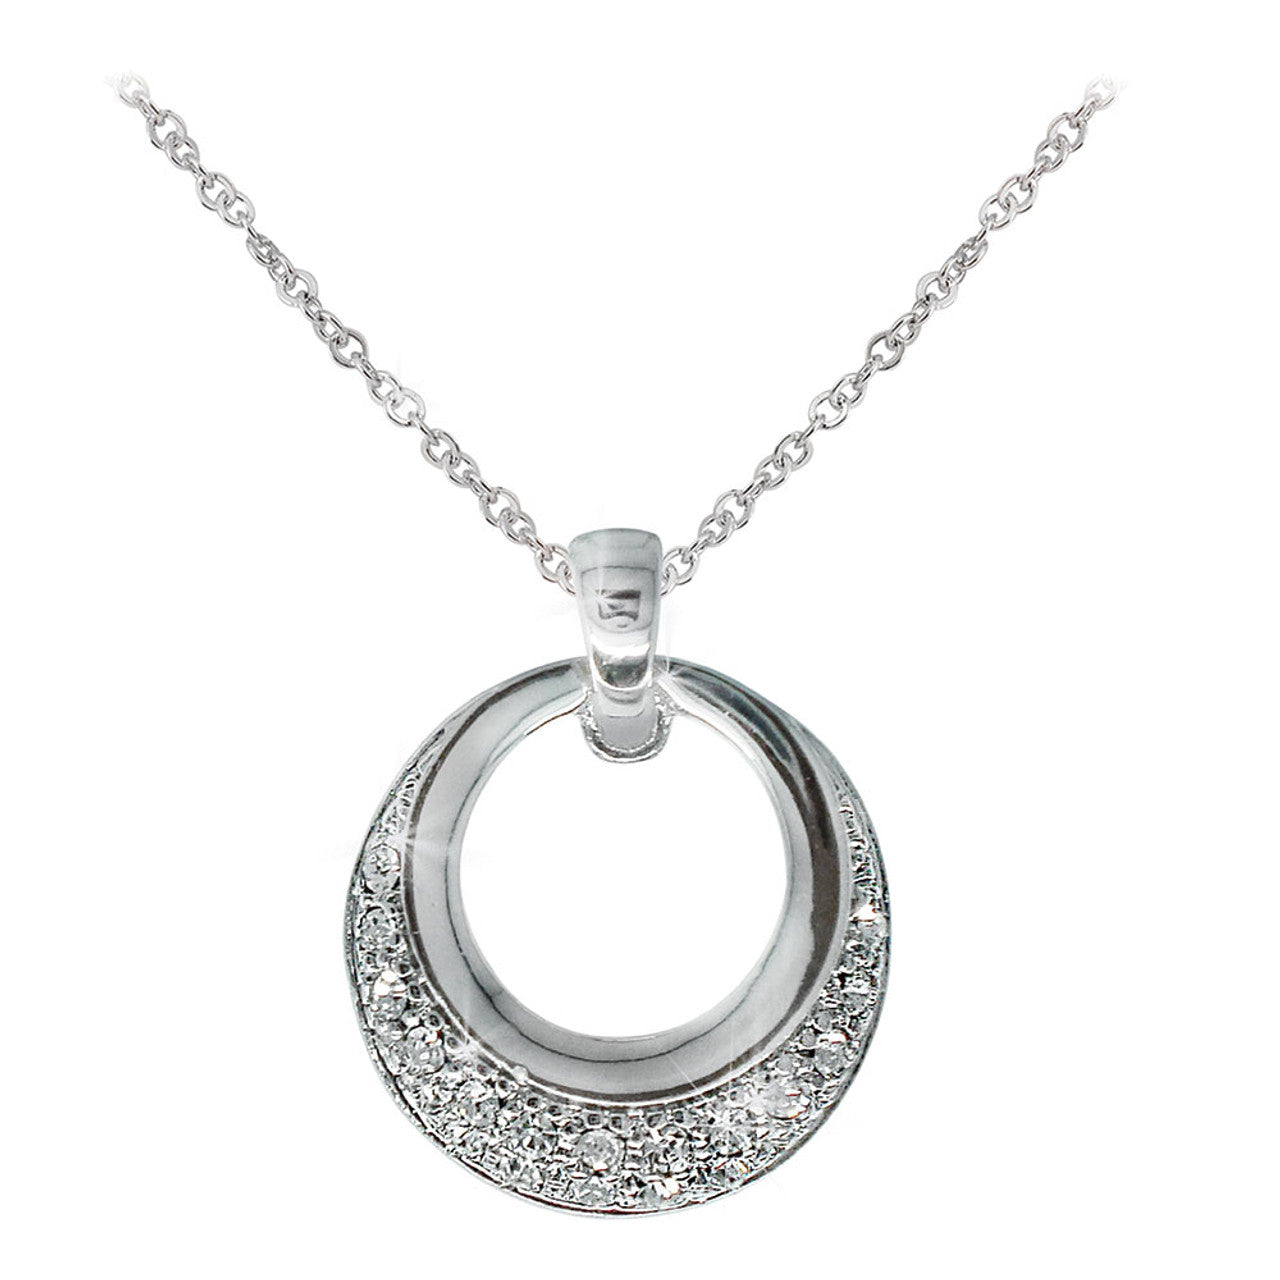 Tipperary Crystal Silver Circle Polished & Pave Pendant  Simple yet sophisticated, this open circle silver pendant makes a serious statement of style. The design features a sleek, highly polished inner circle bordered with an outer circle completely lined with shimmering clear crystal pavé accents.